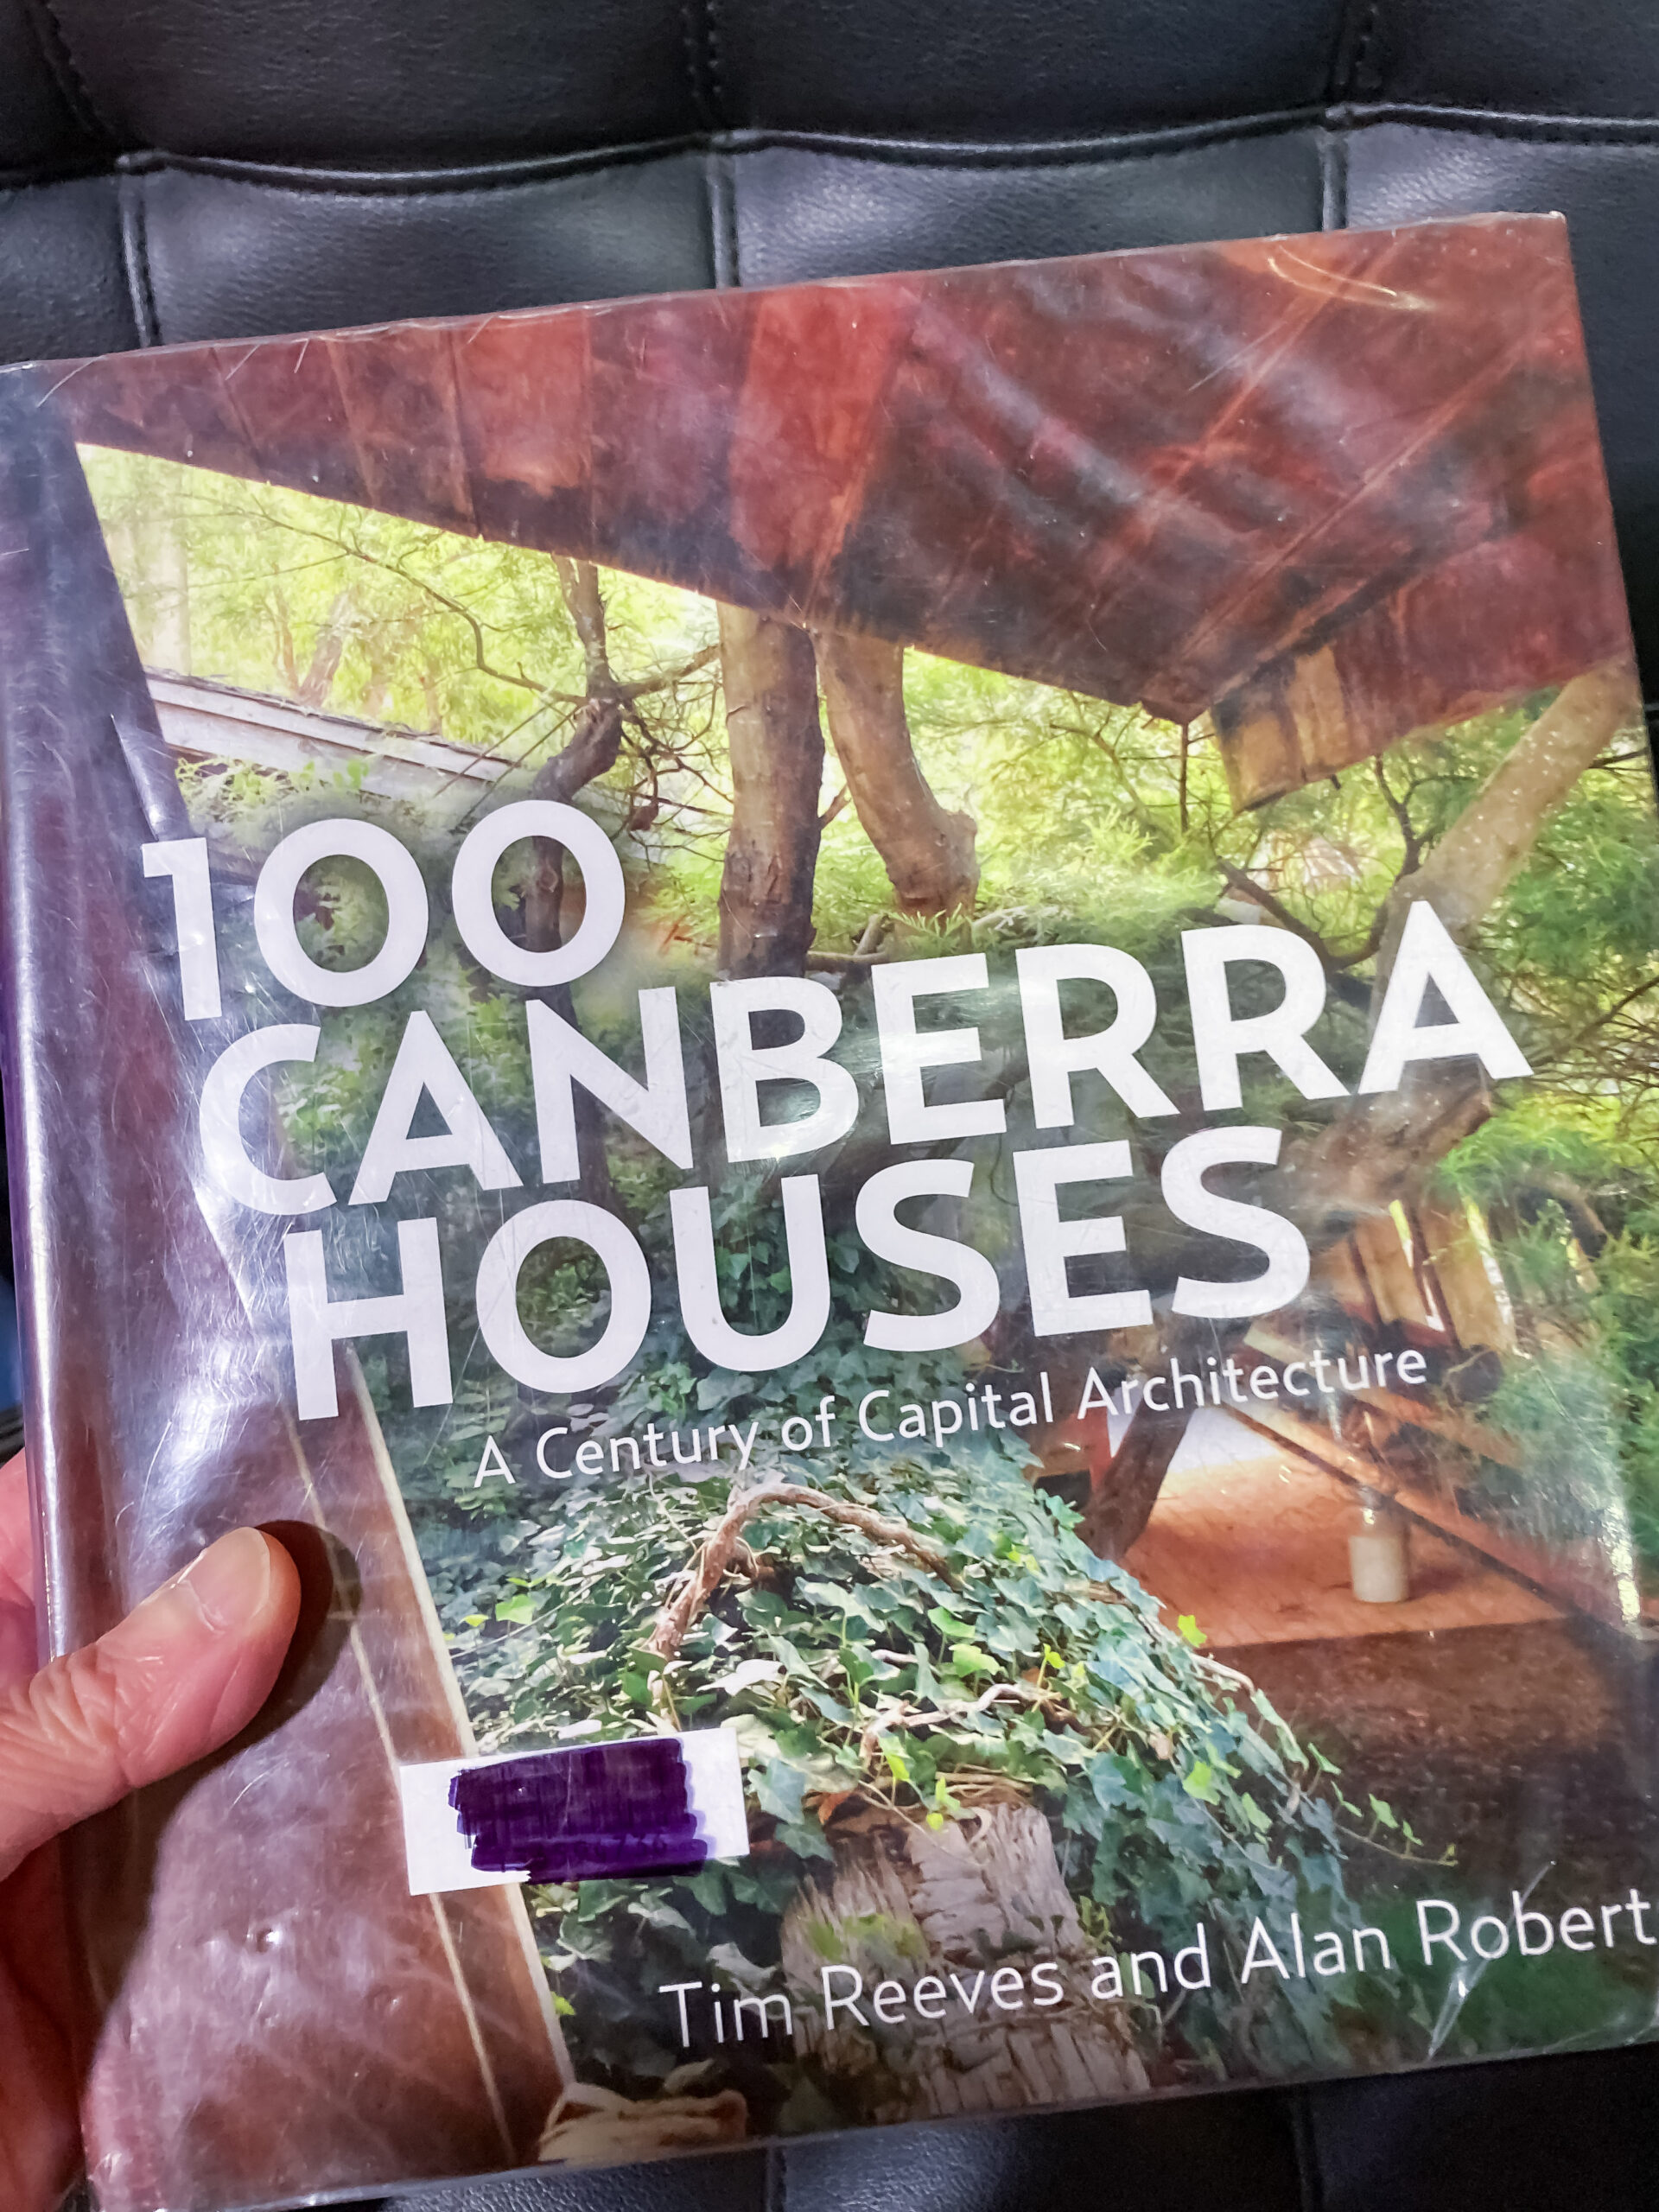 The cover of a book titled 100 Canberra Houses which has a picture of a timber structure surrounded by green plants